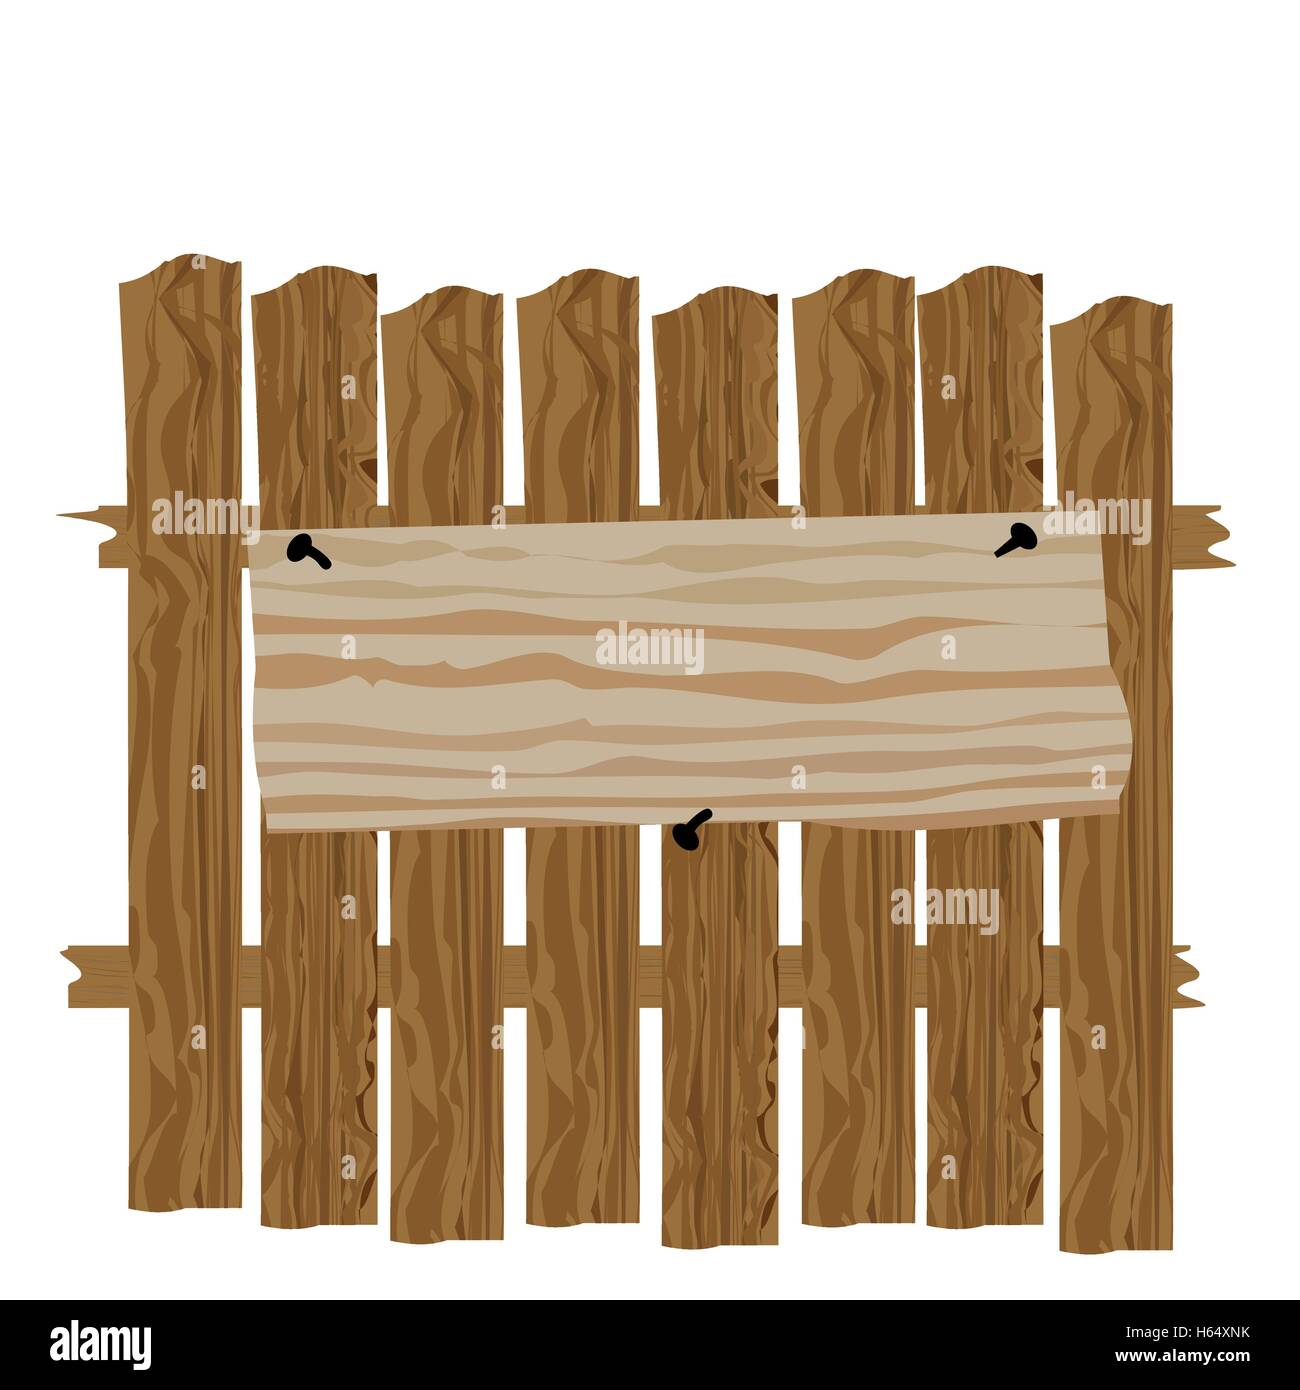 A fence made of wood. Classified ads and commercials illustration Stock Vector